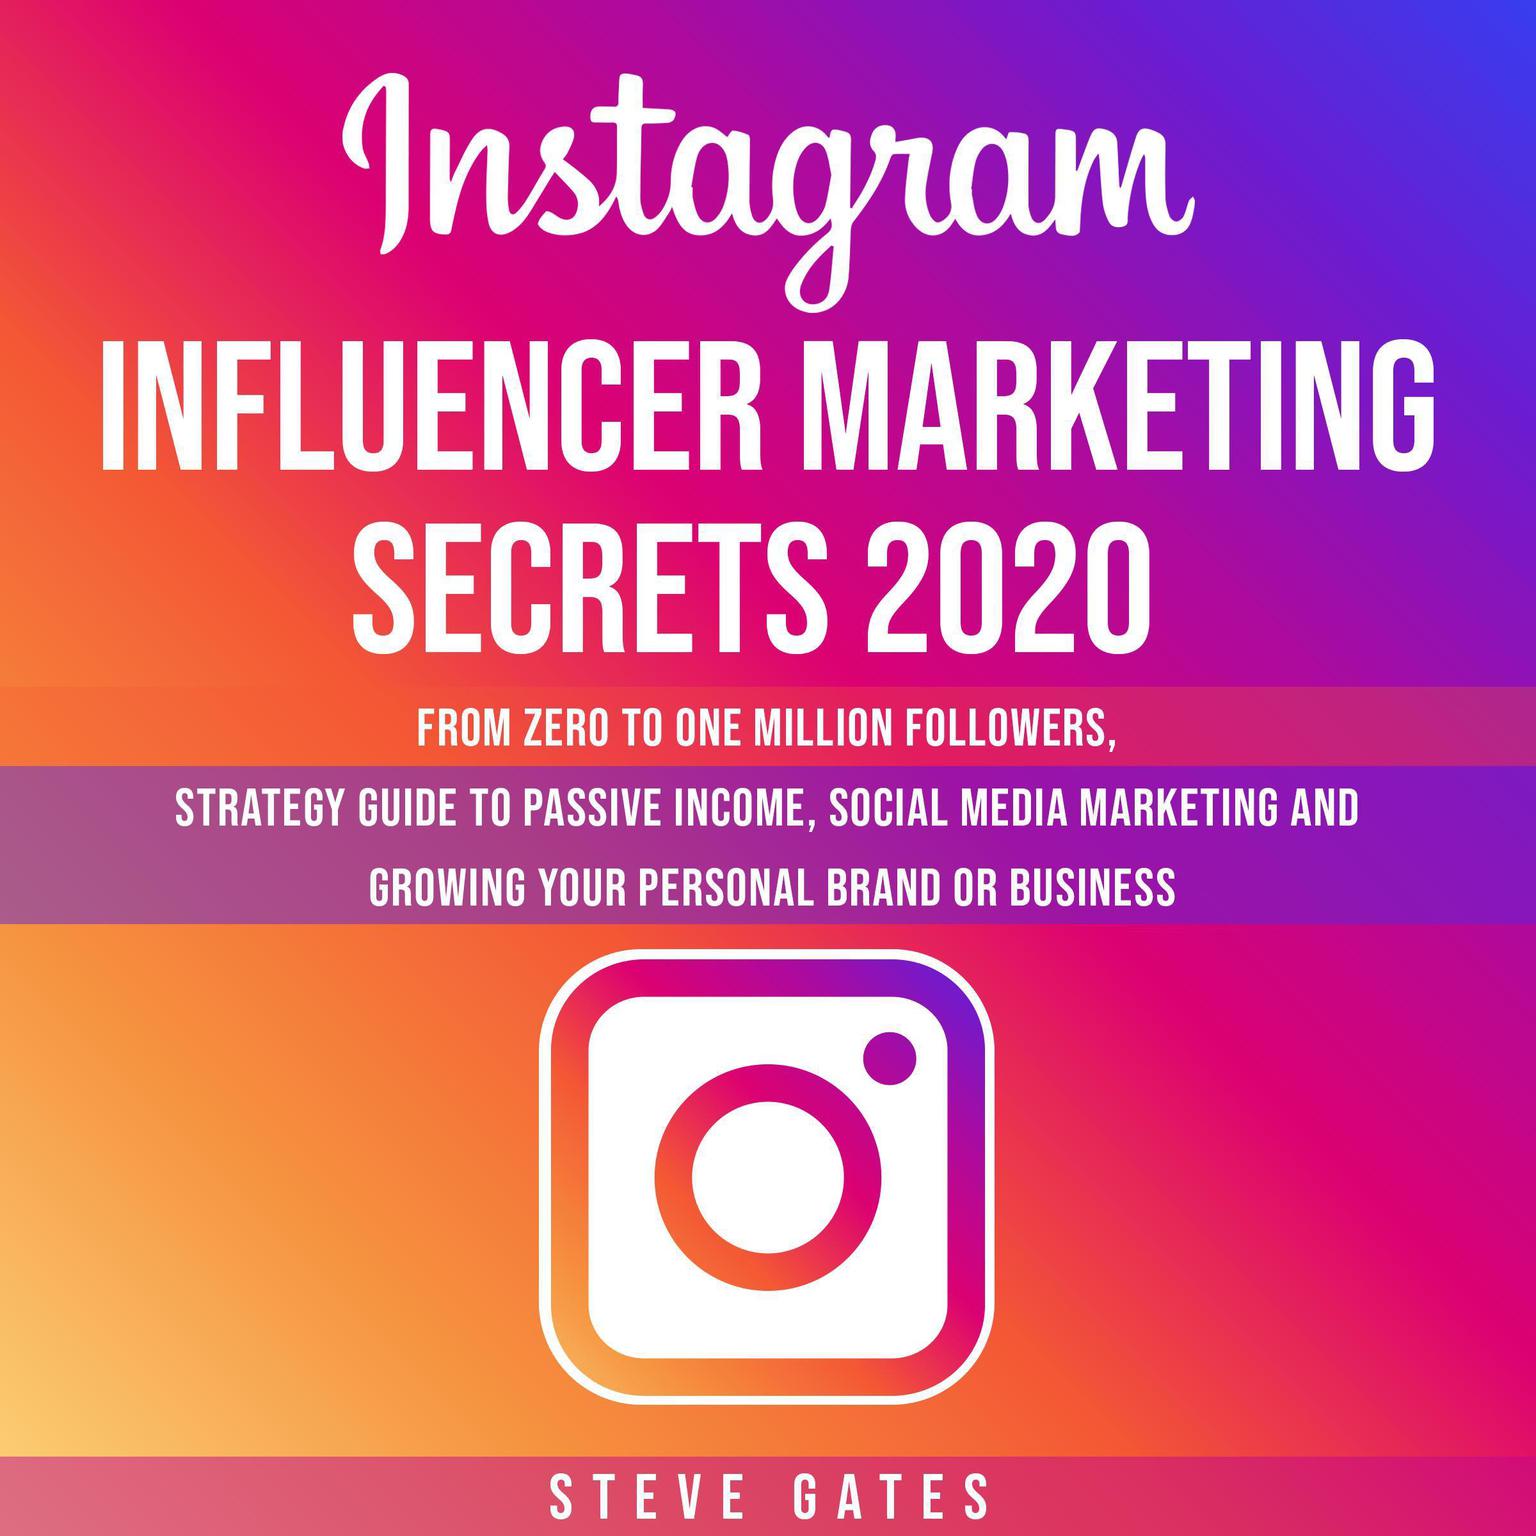 Instagram Influencer Marketing Secrets 2020: From Zero to One Million Followers, Strategy Guide to Passive Income, Social Media Marketing and Growing your Personal Brand or Business: From Zero to One Million Followers, Strategy Guide to Passive Income, Social Media Marketing and Growing your Personal Brand or Business Audiobook, by Steve Gates